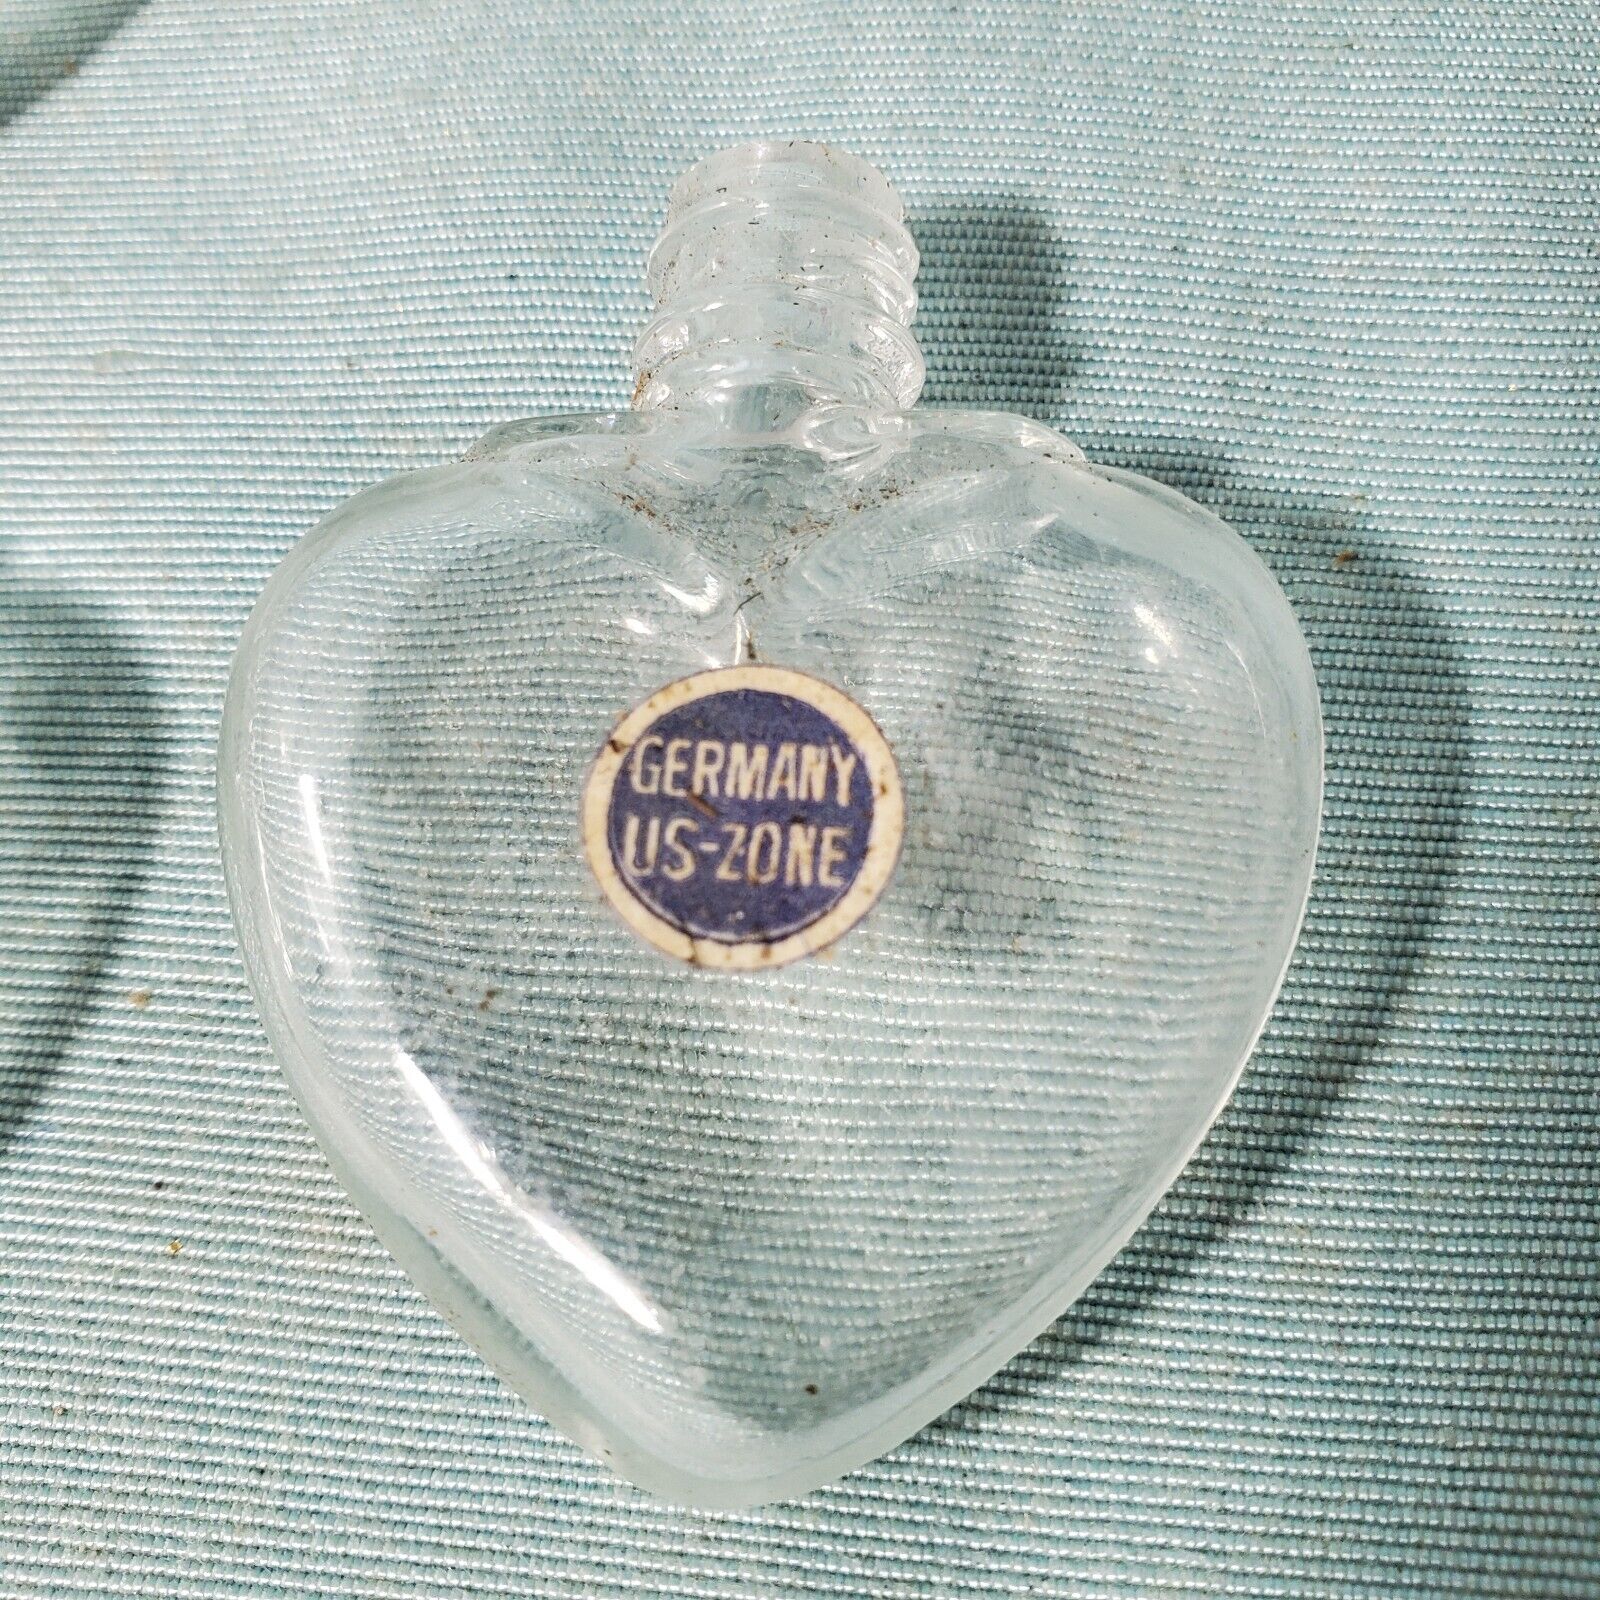 Vintage WWII Stock Miniature Glass Heart Shaped Perfume Bottle in CLEAR Lot of 8